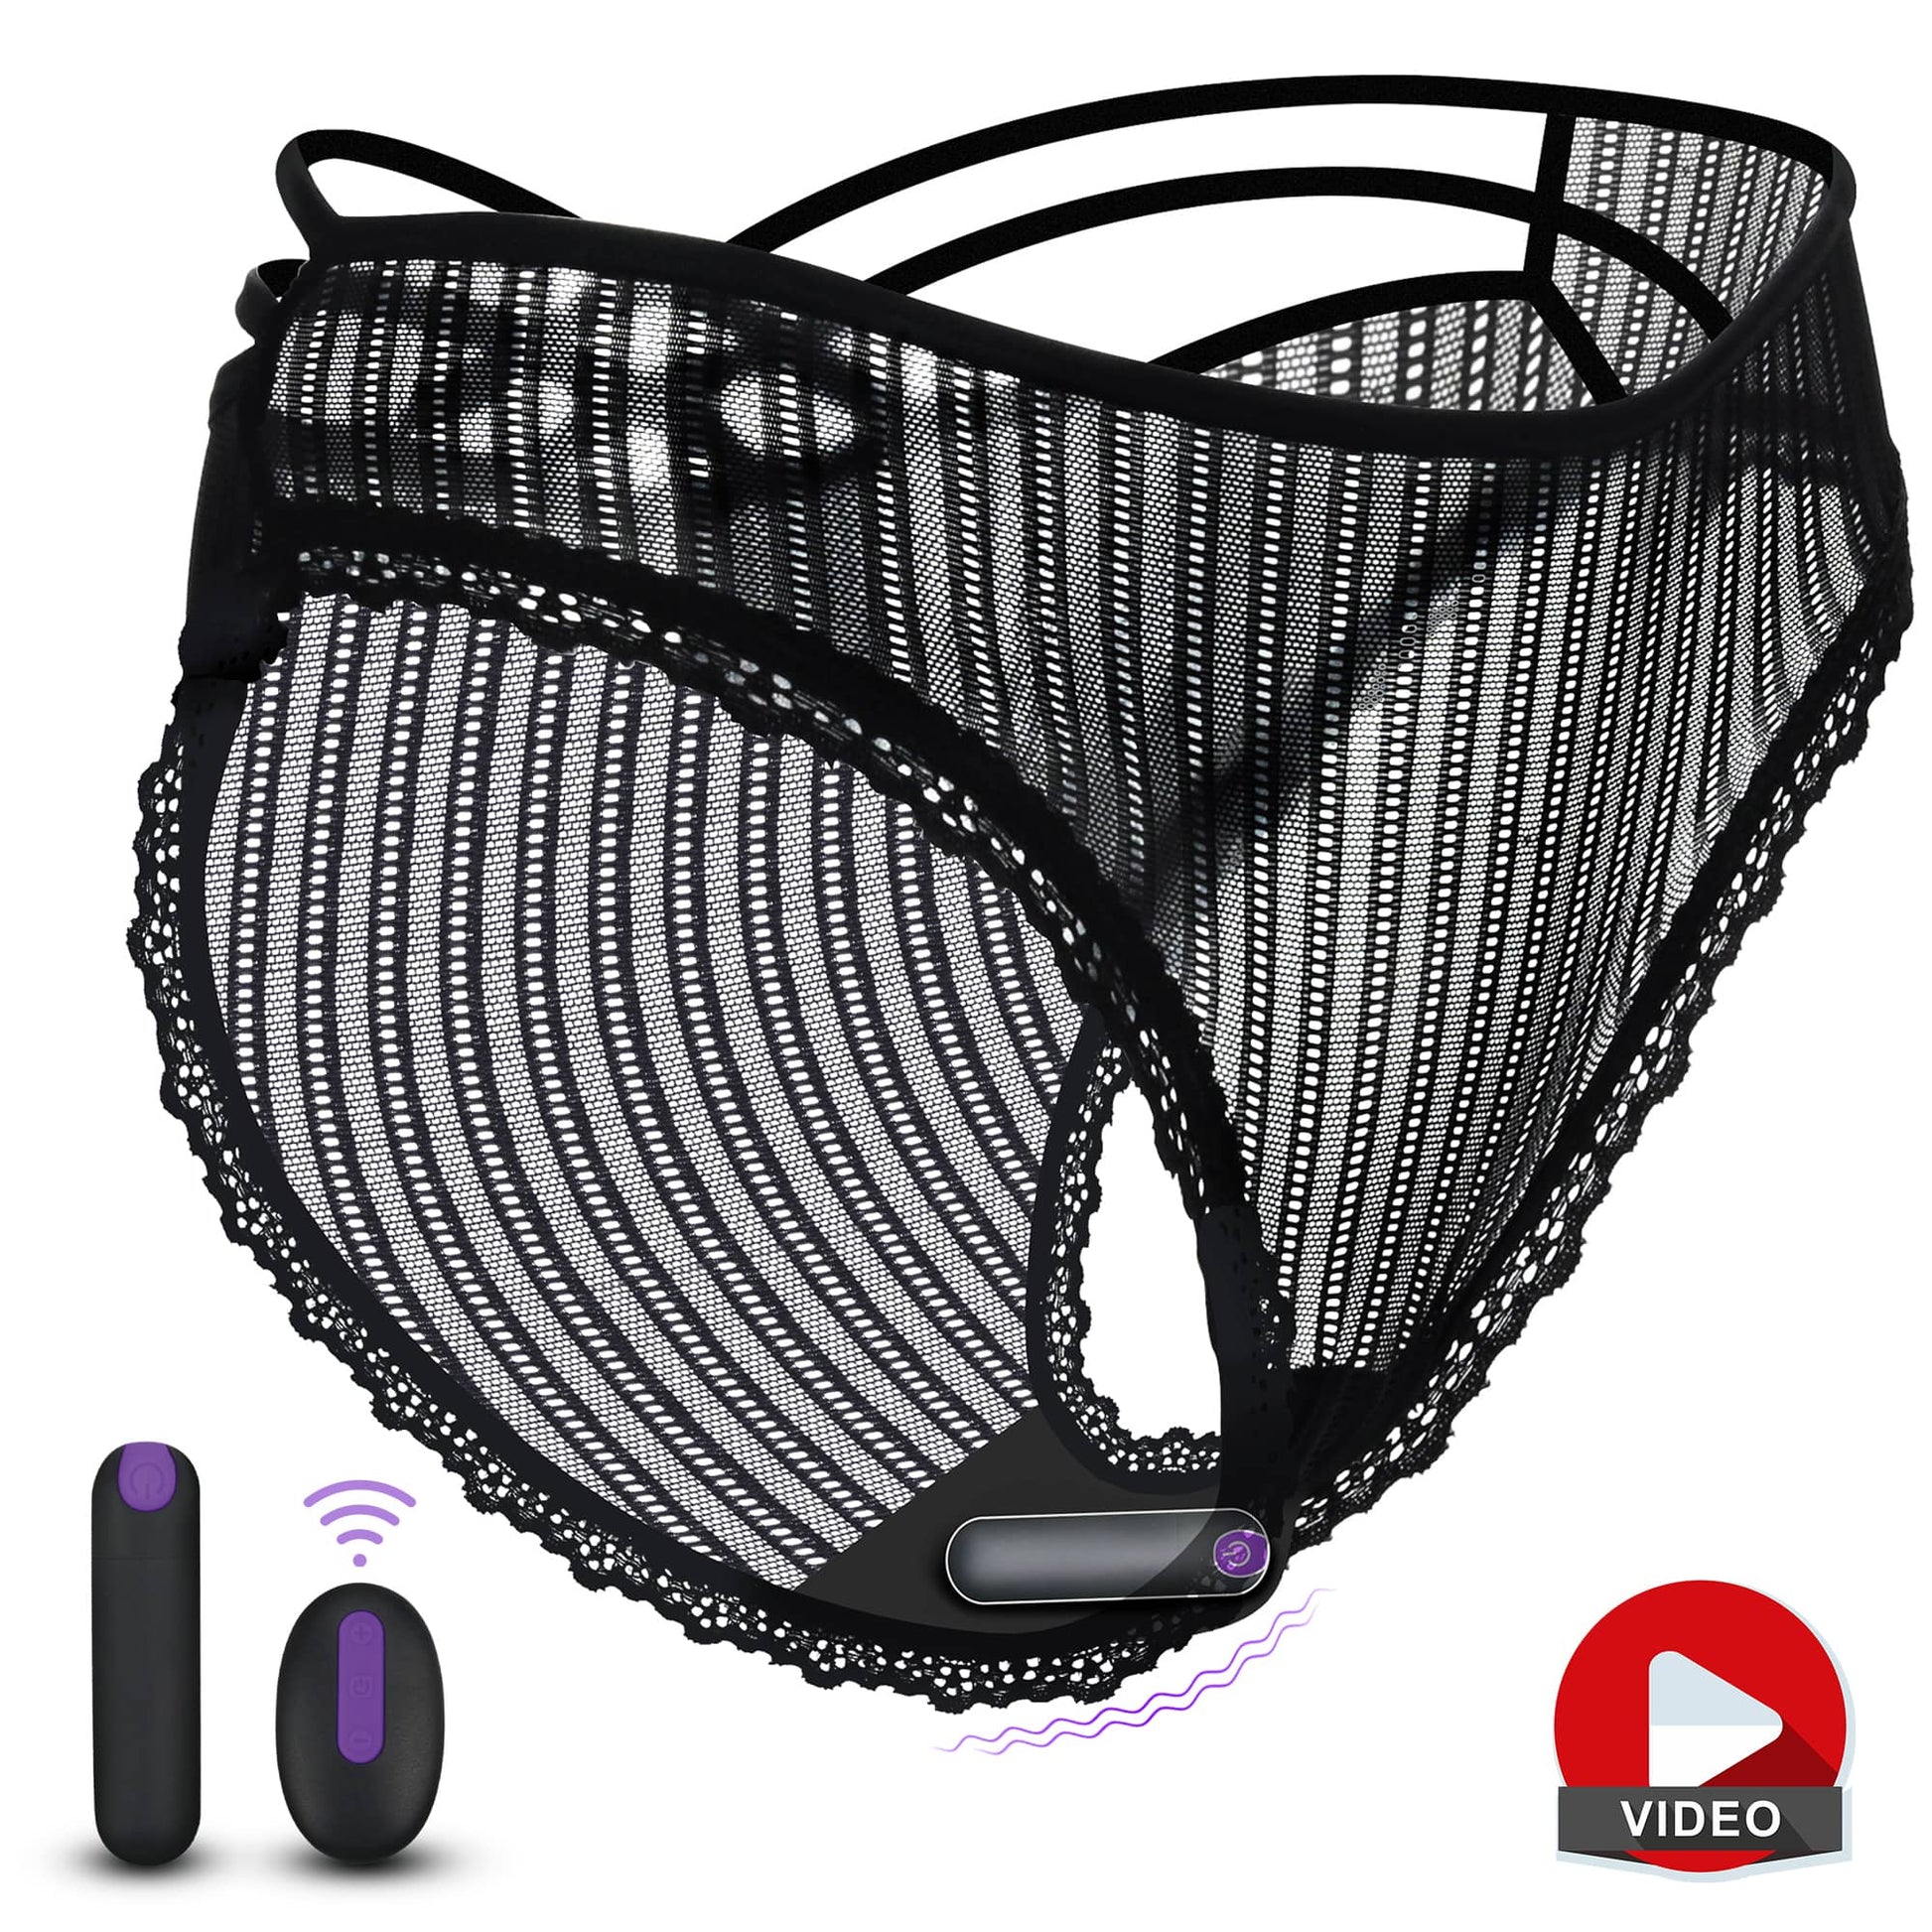 The lace vibrating panties with vibrator with a video playback logo